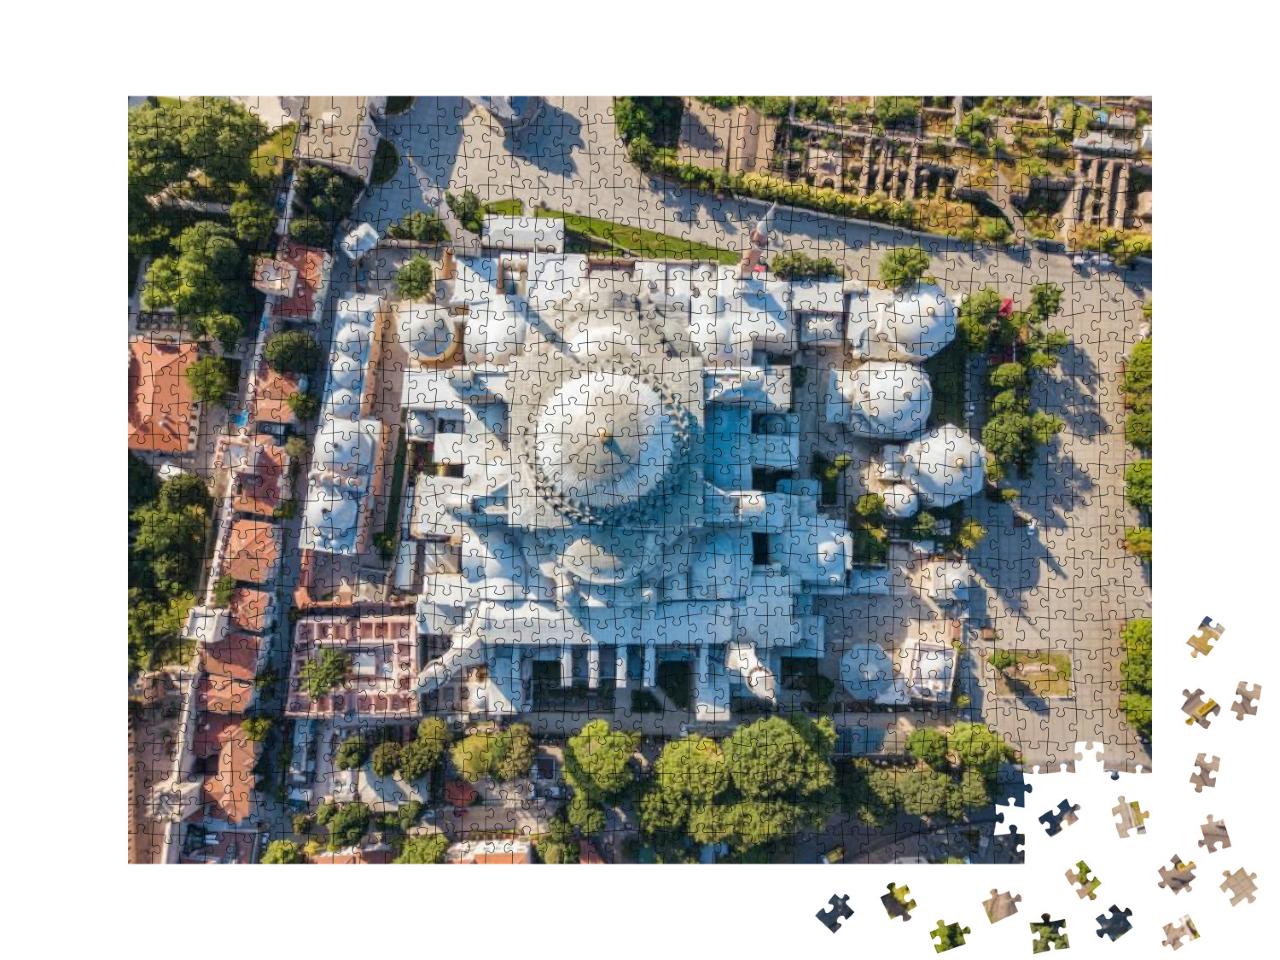 Hagia Sophia Museum in Istanbul. Top View... Jigsaw Puzzle with 1000 pieces